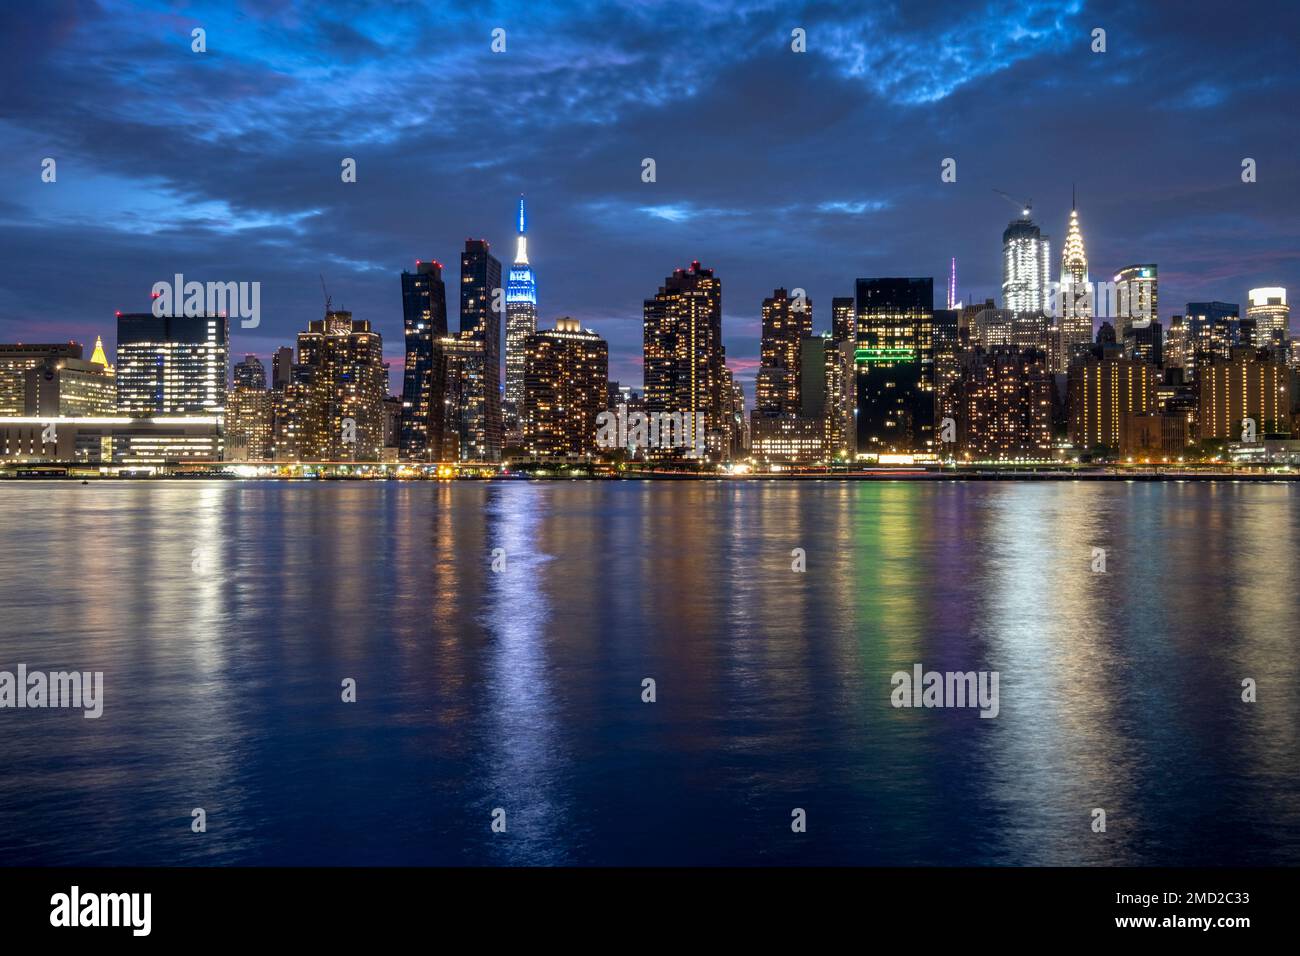 Manhattan Skyline at night featuring the Empire State Building across the East River, New York, USA Stock Photo